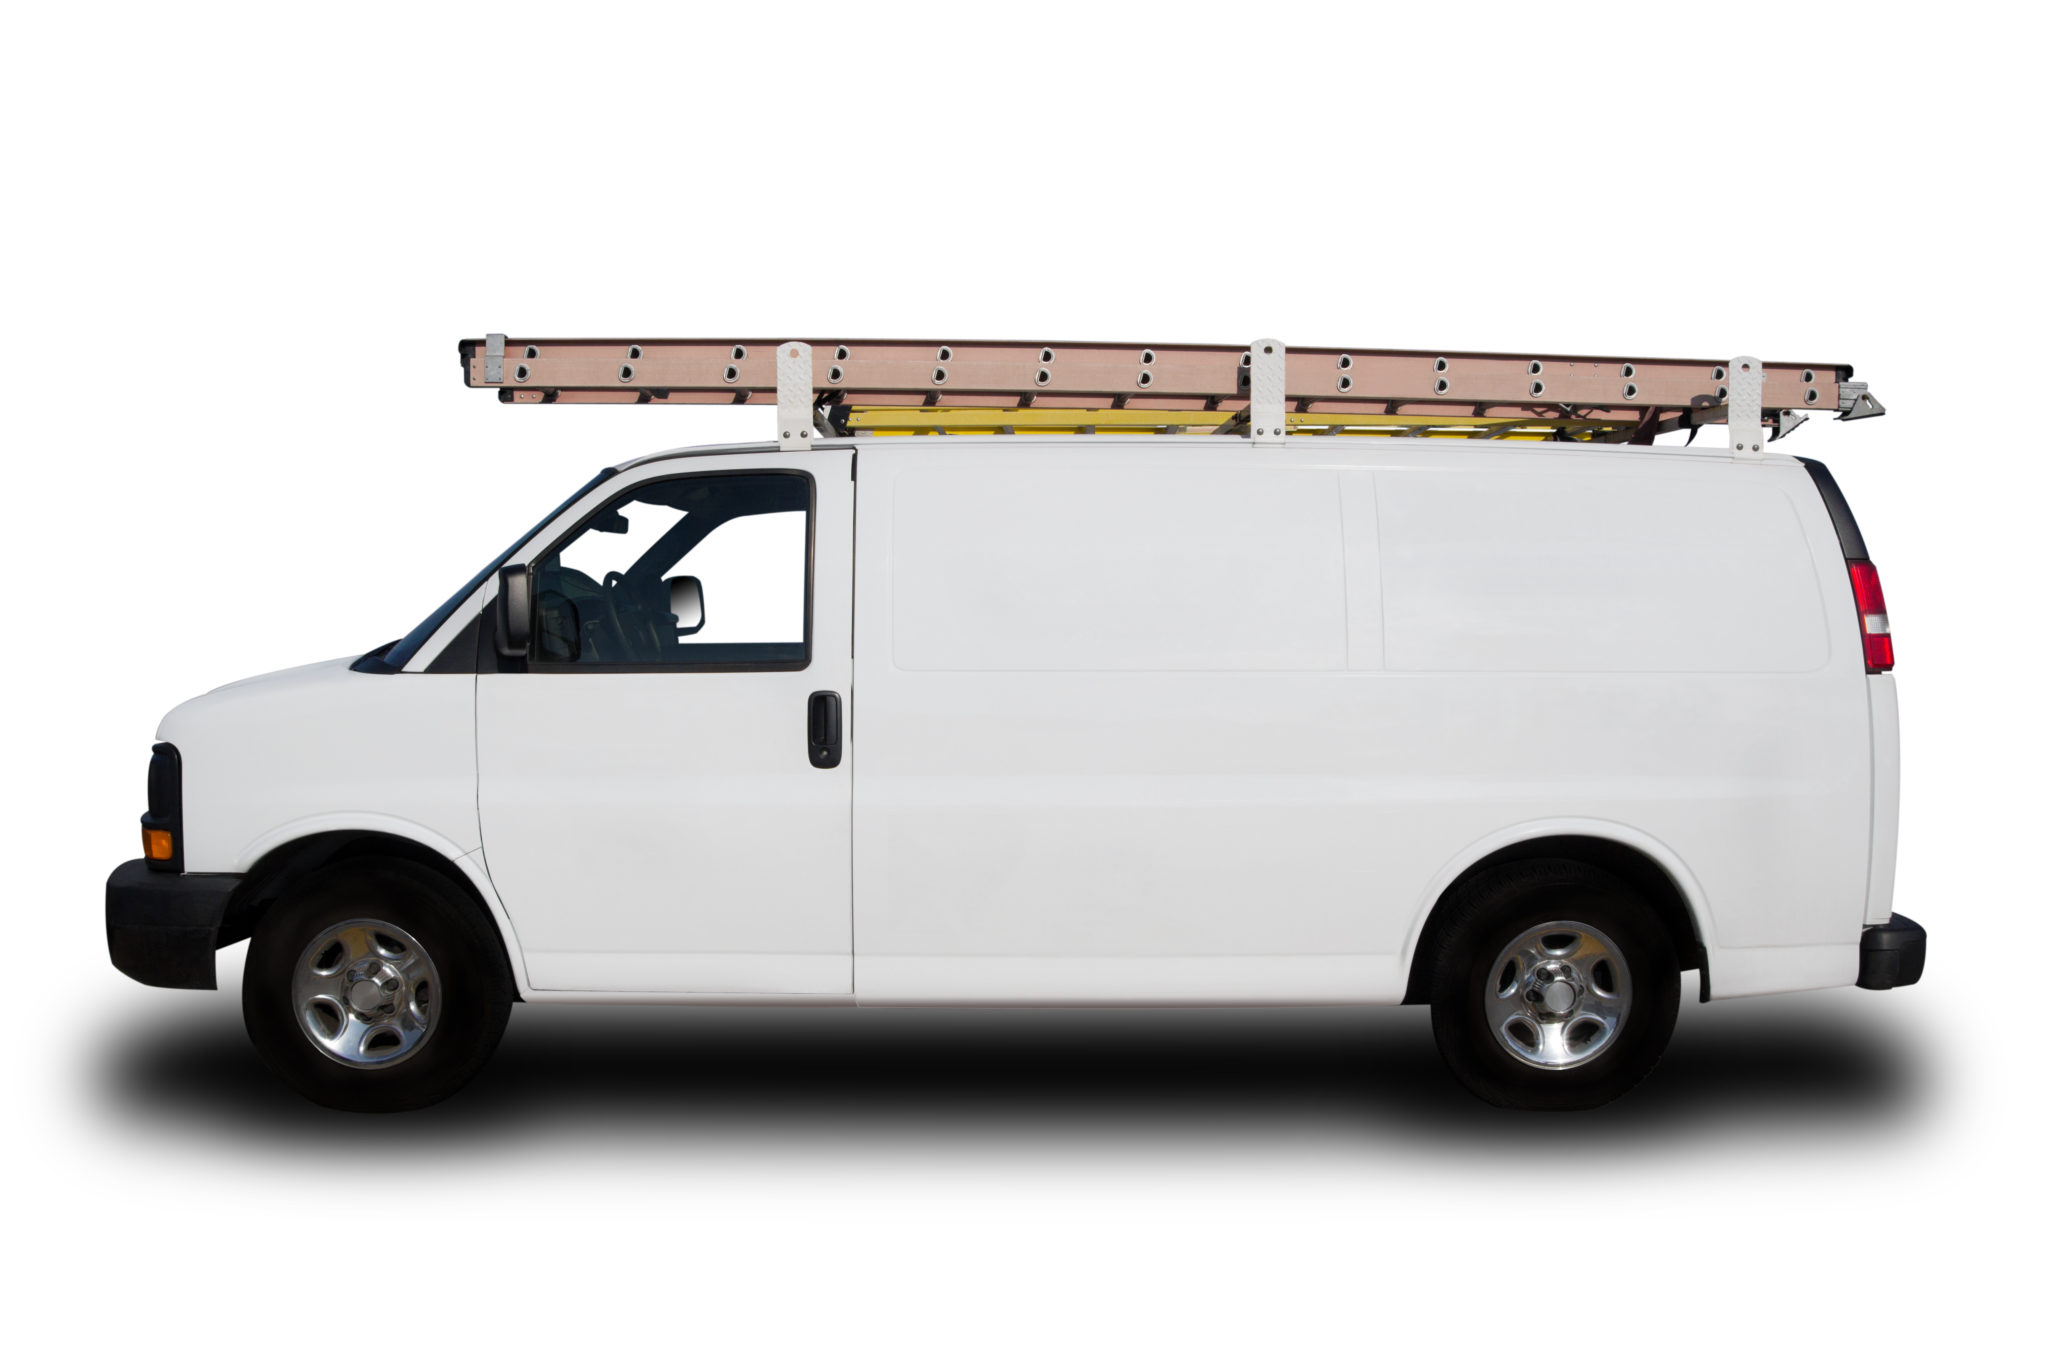 Canadian White Van Insurance Coverage 